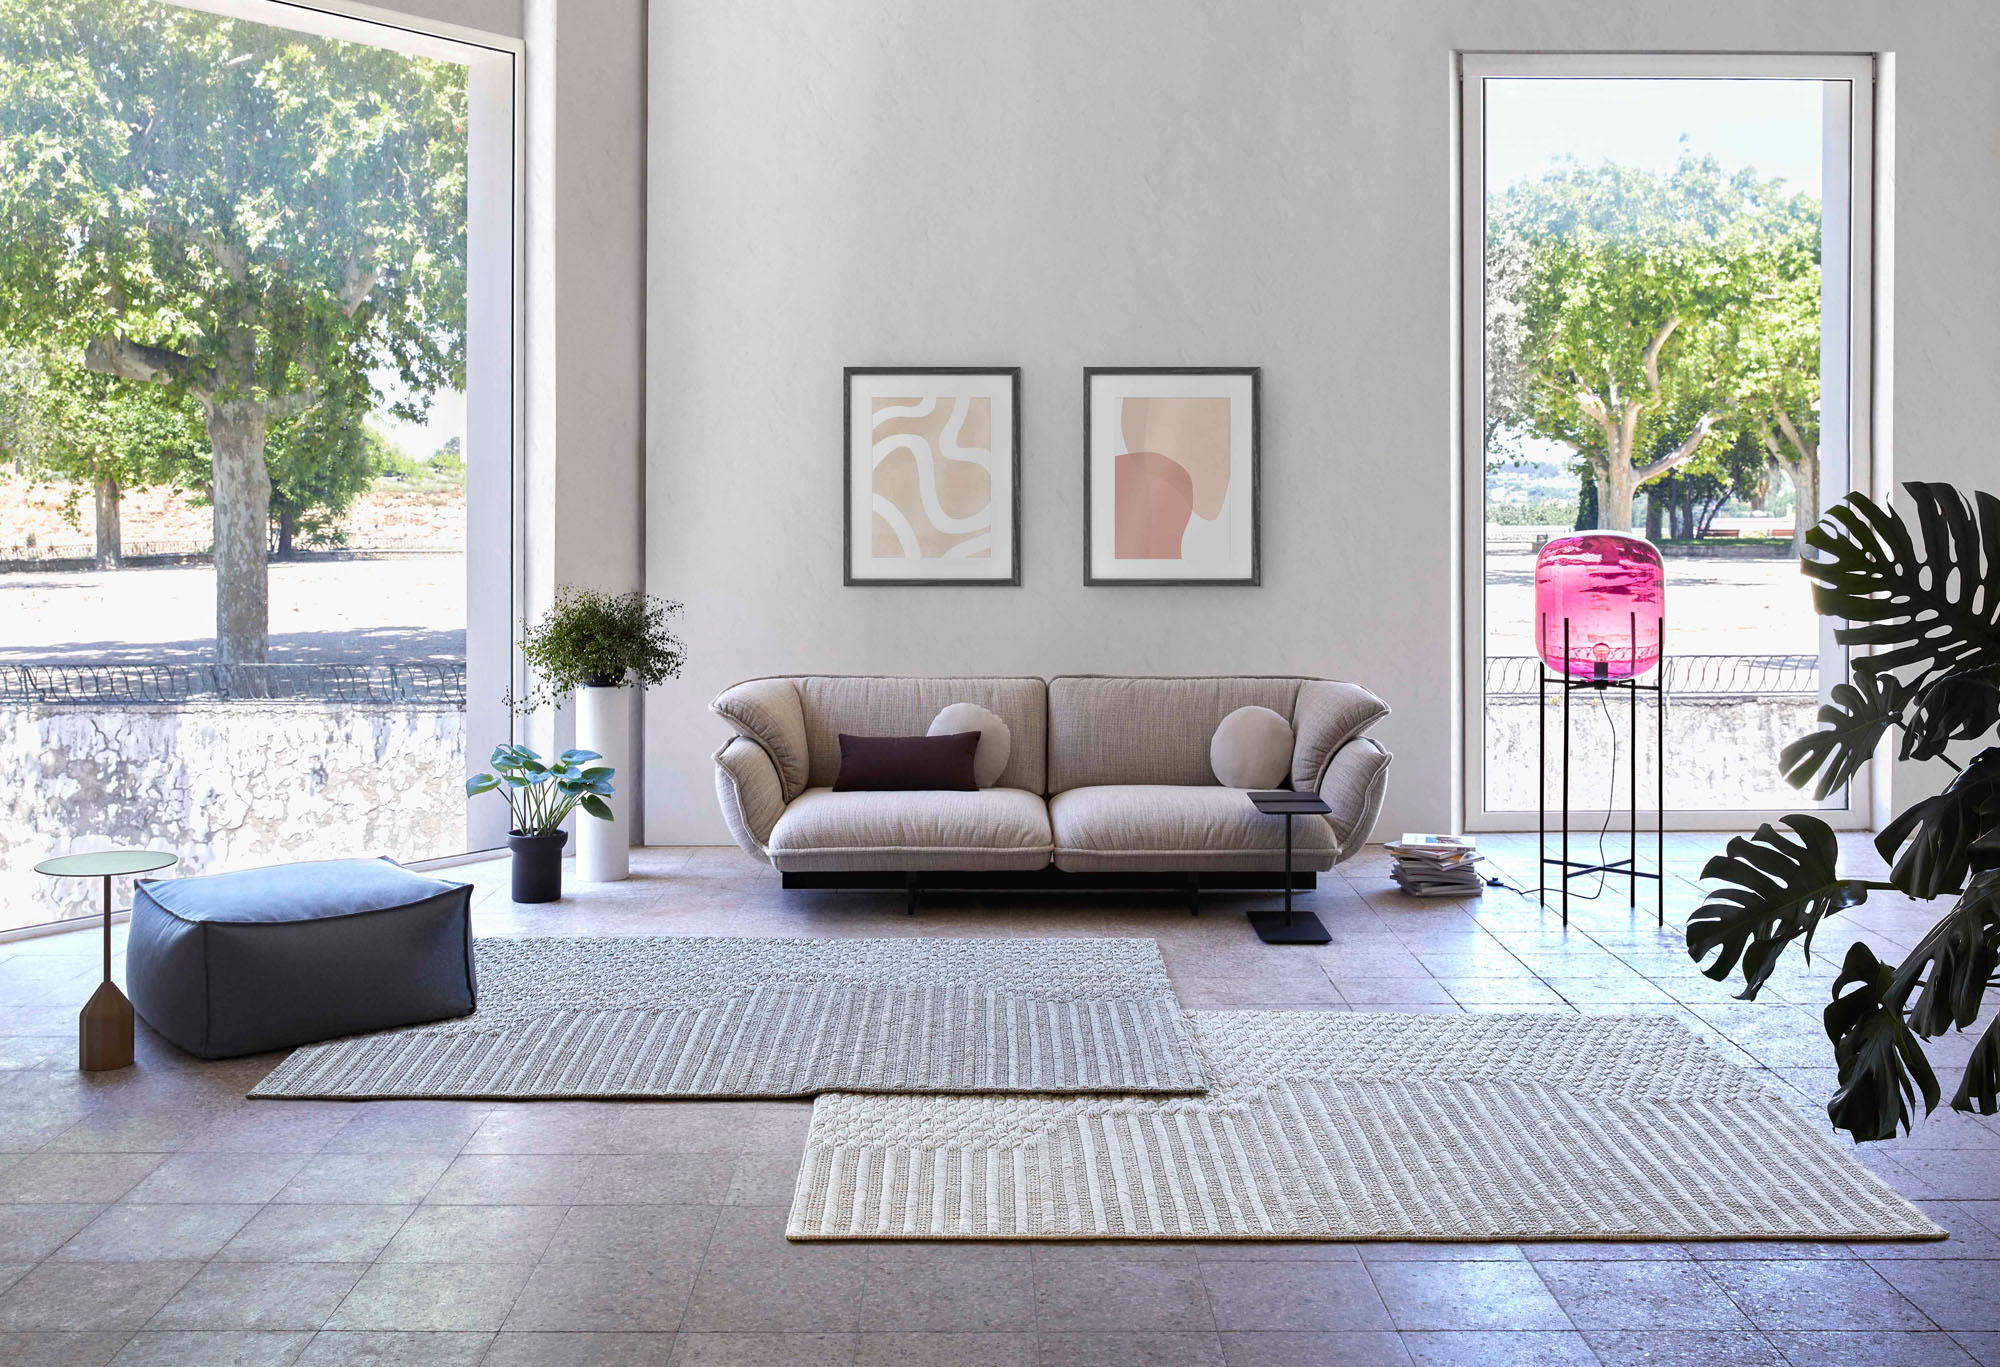 image of a sofa and rugs in a room